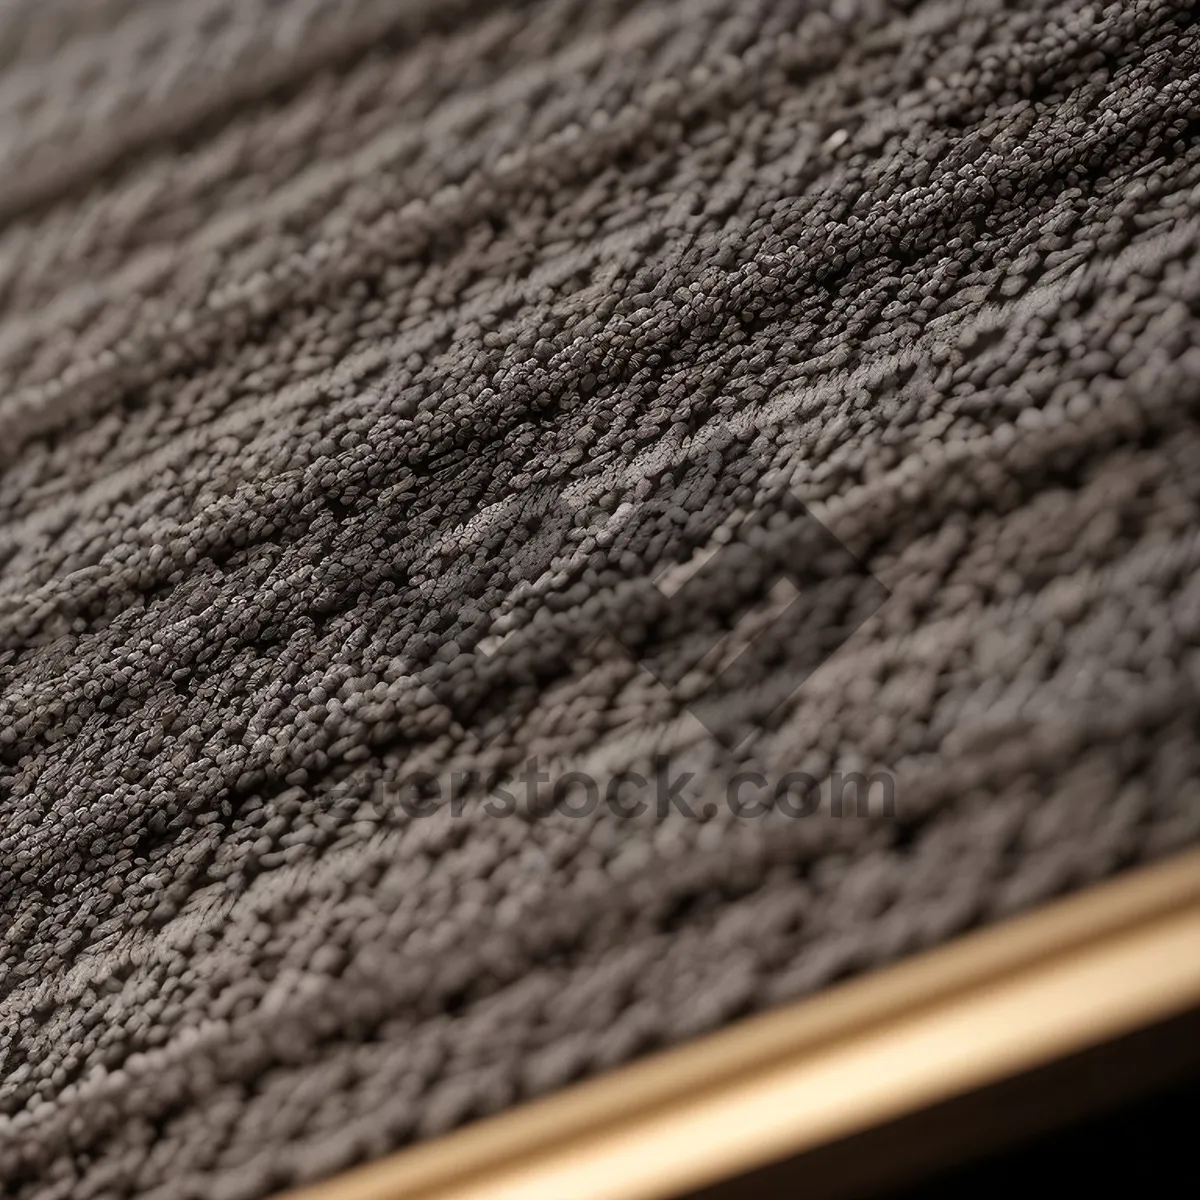 Picture of Textured Wool Cardigan Sweater: Closeup Fashion Detail